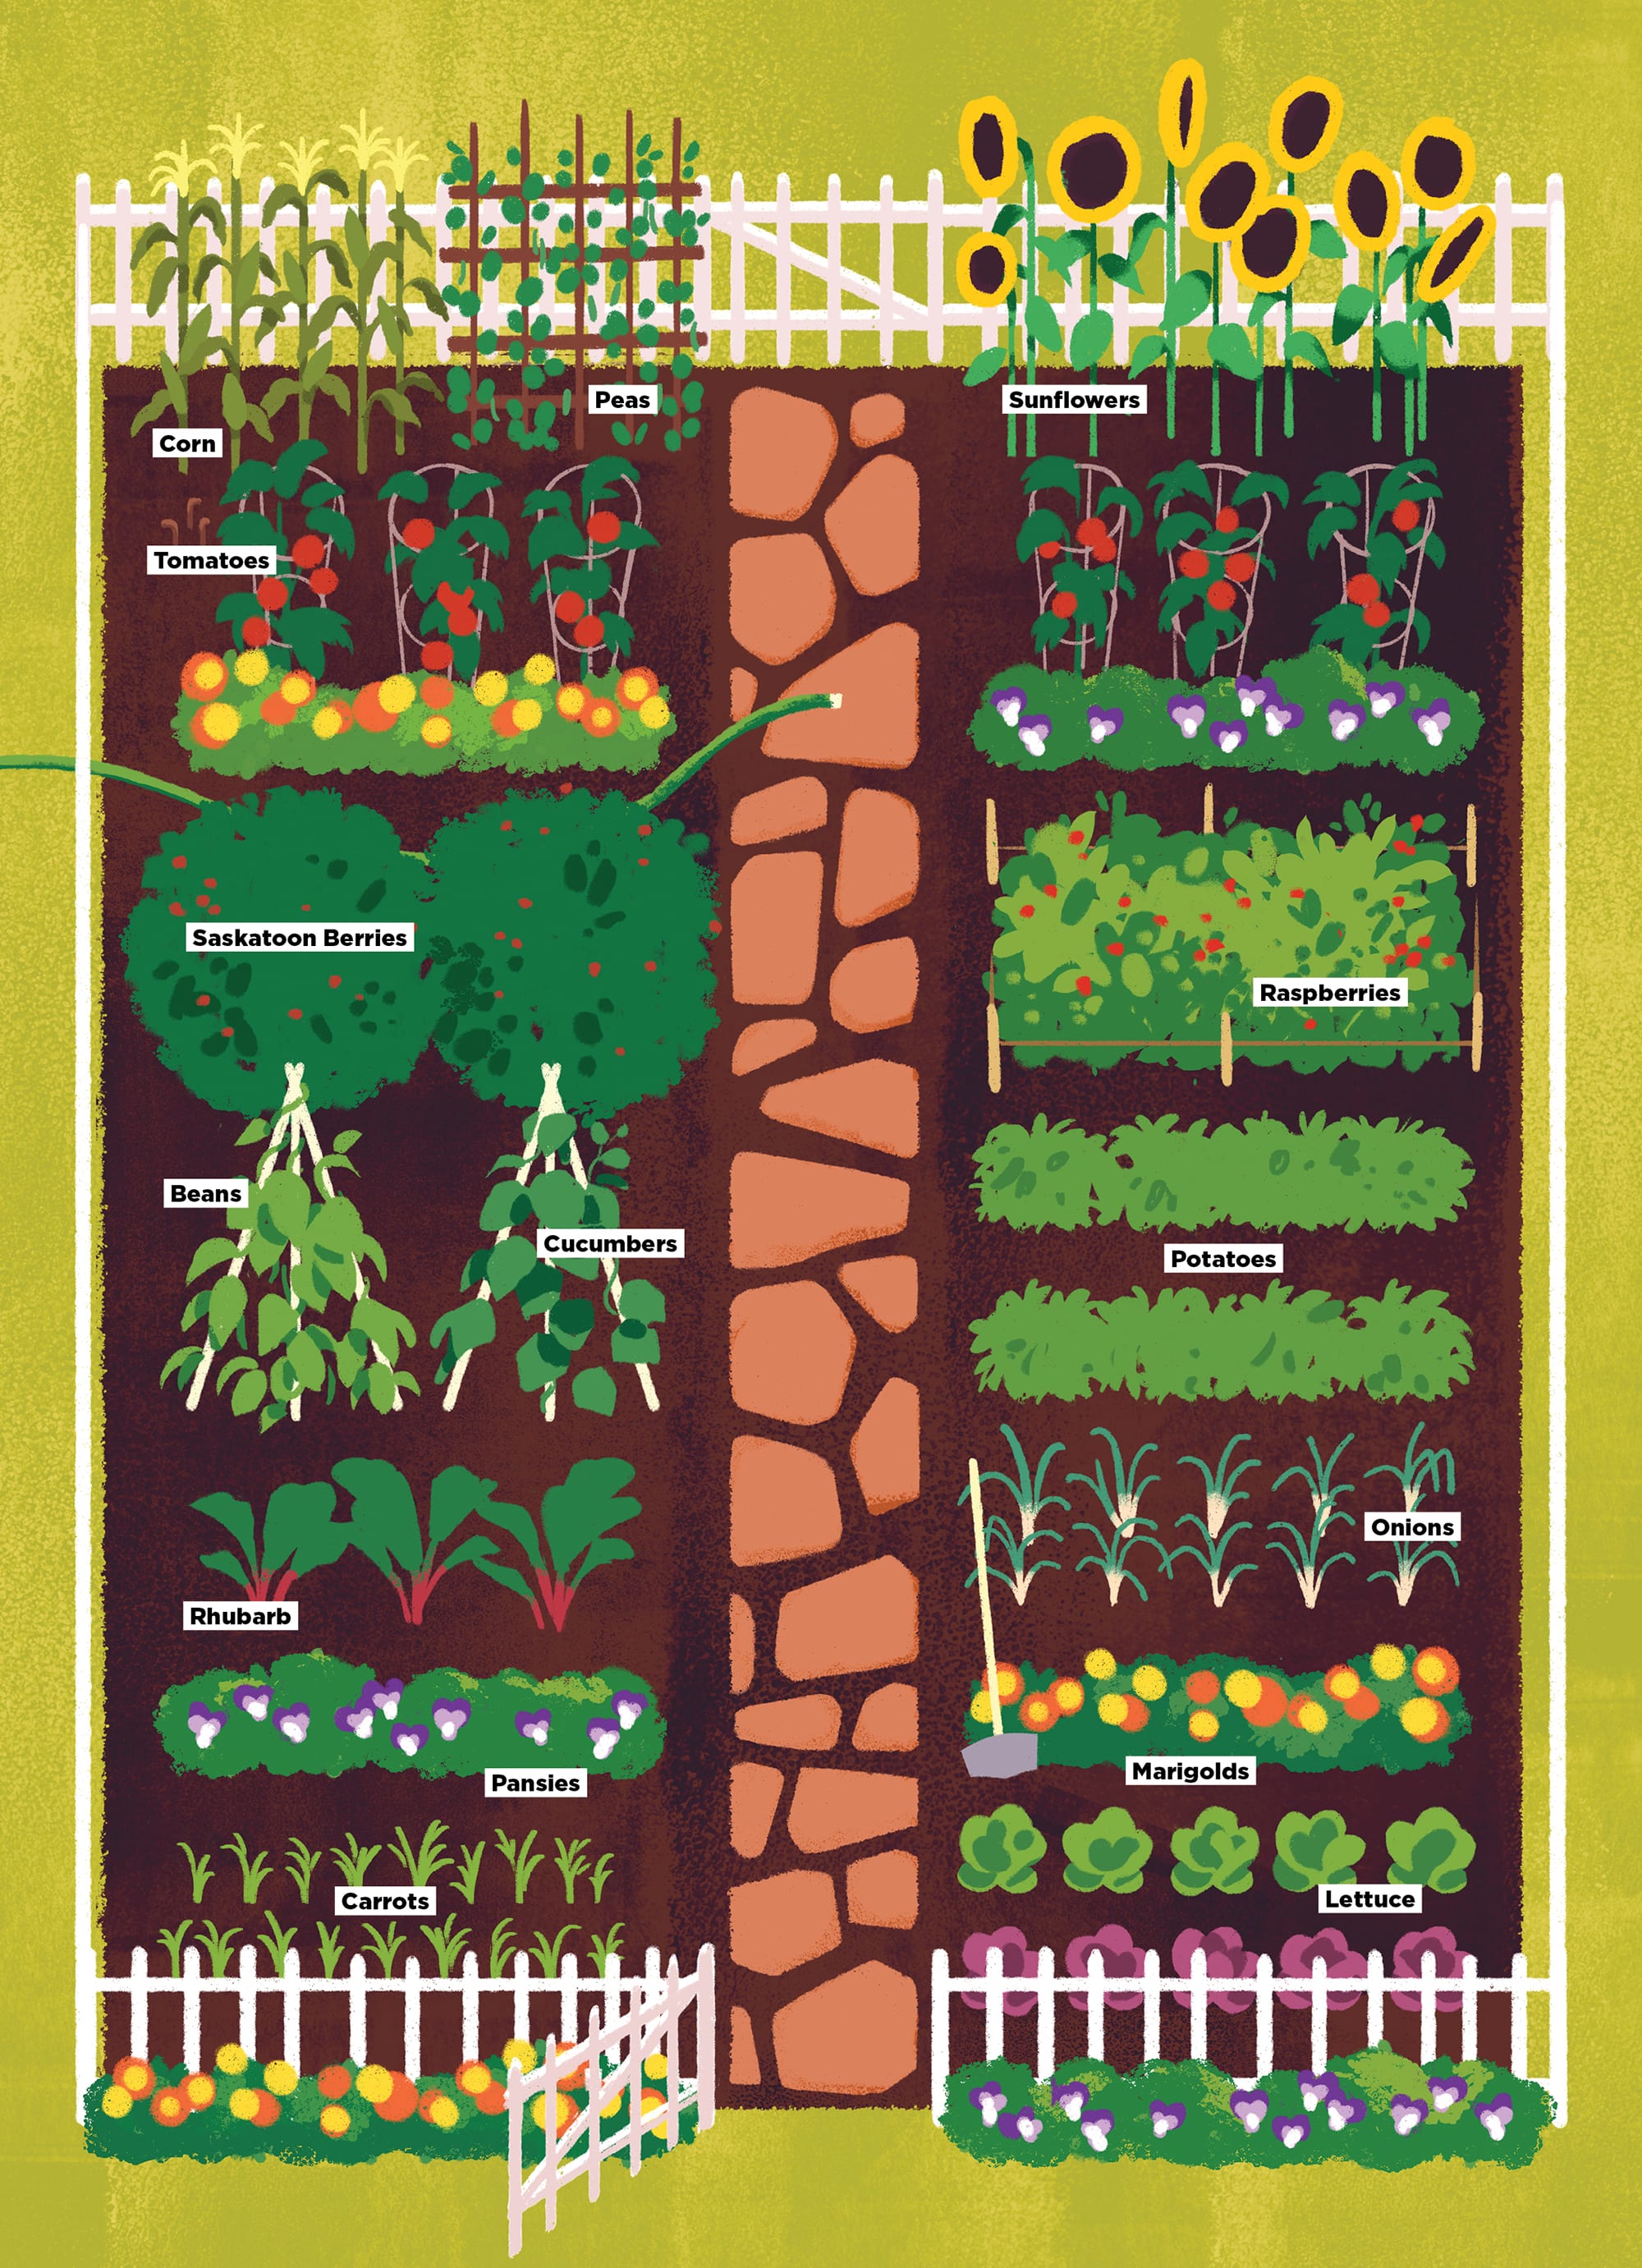 full illustration showing how to plan a garden with flowers vegetables fruit bushes and stone path